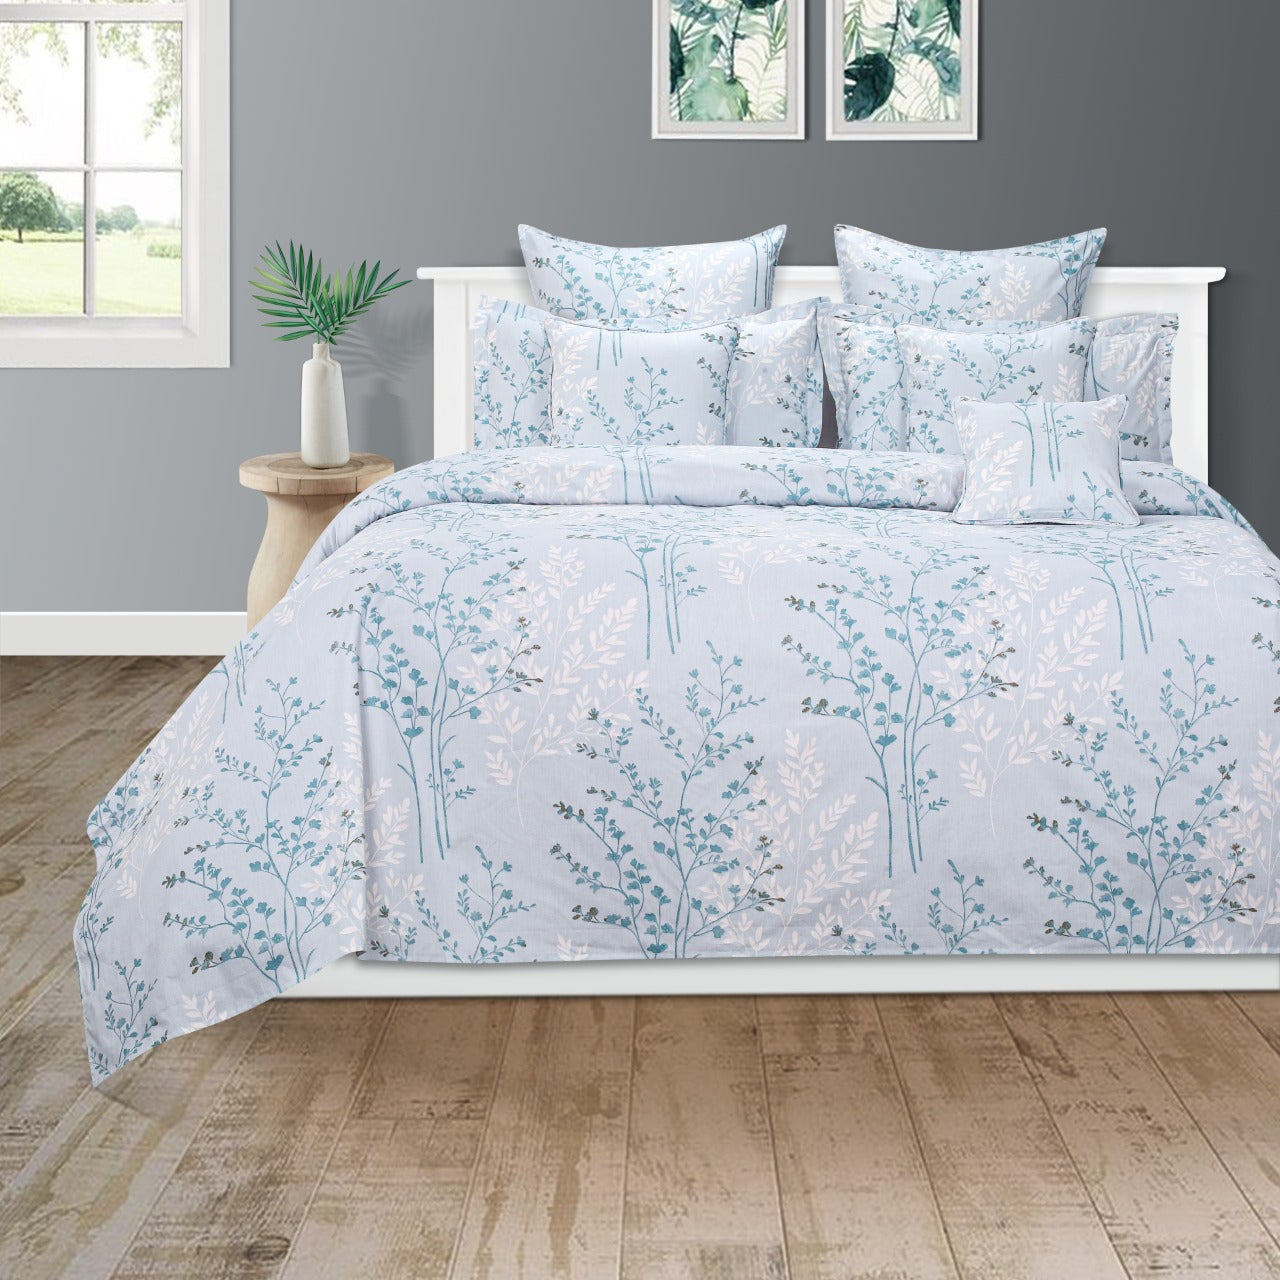 Detec™ Printed Veda Cotton Bed Sheet - 108 x 108 Inches